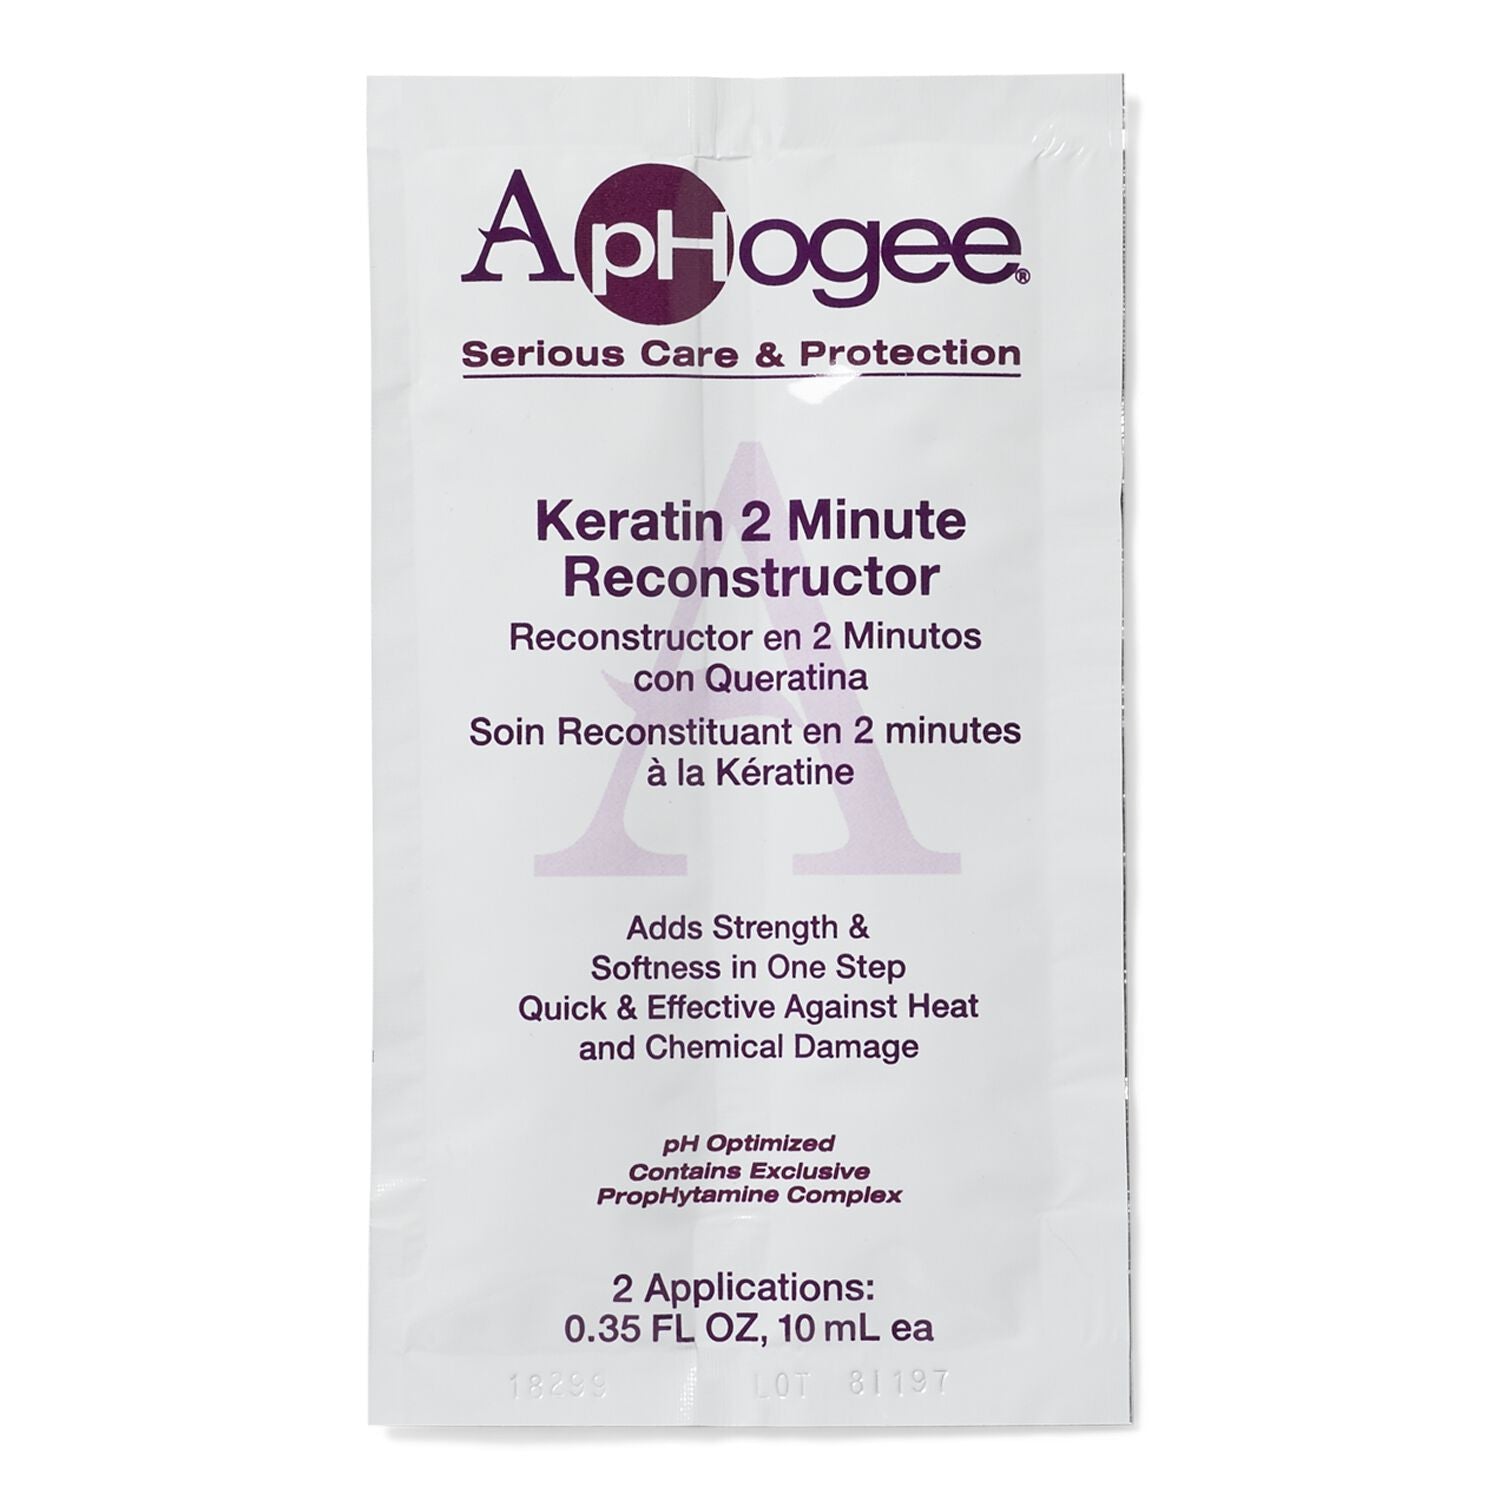 ApHogee Two Minute Intensive Keratin Reconstructor Packette